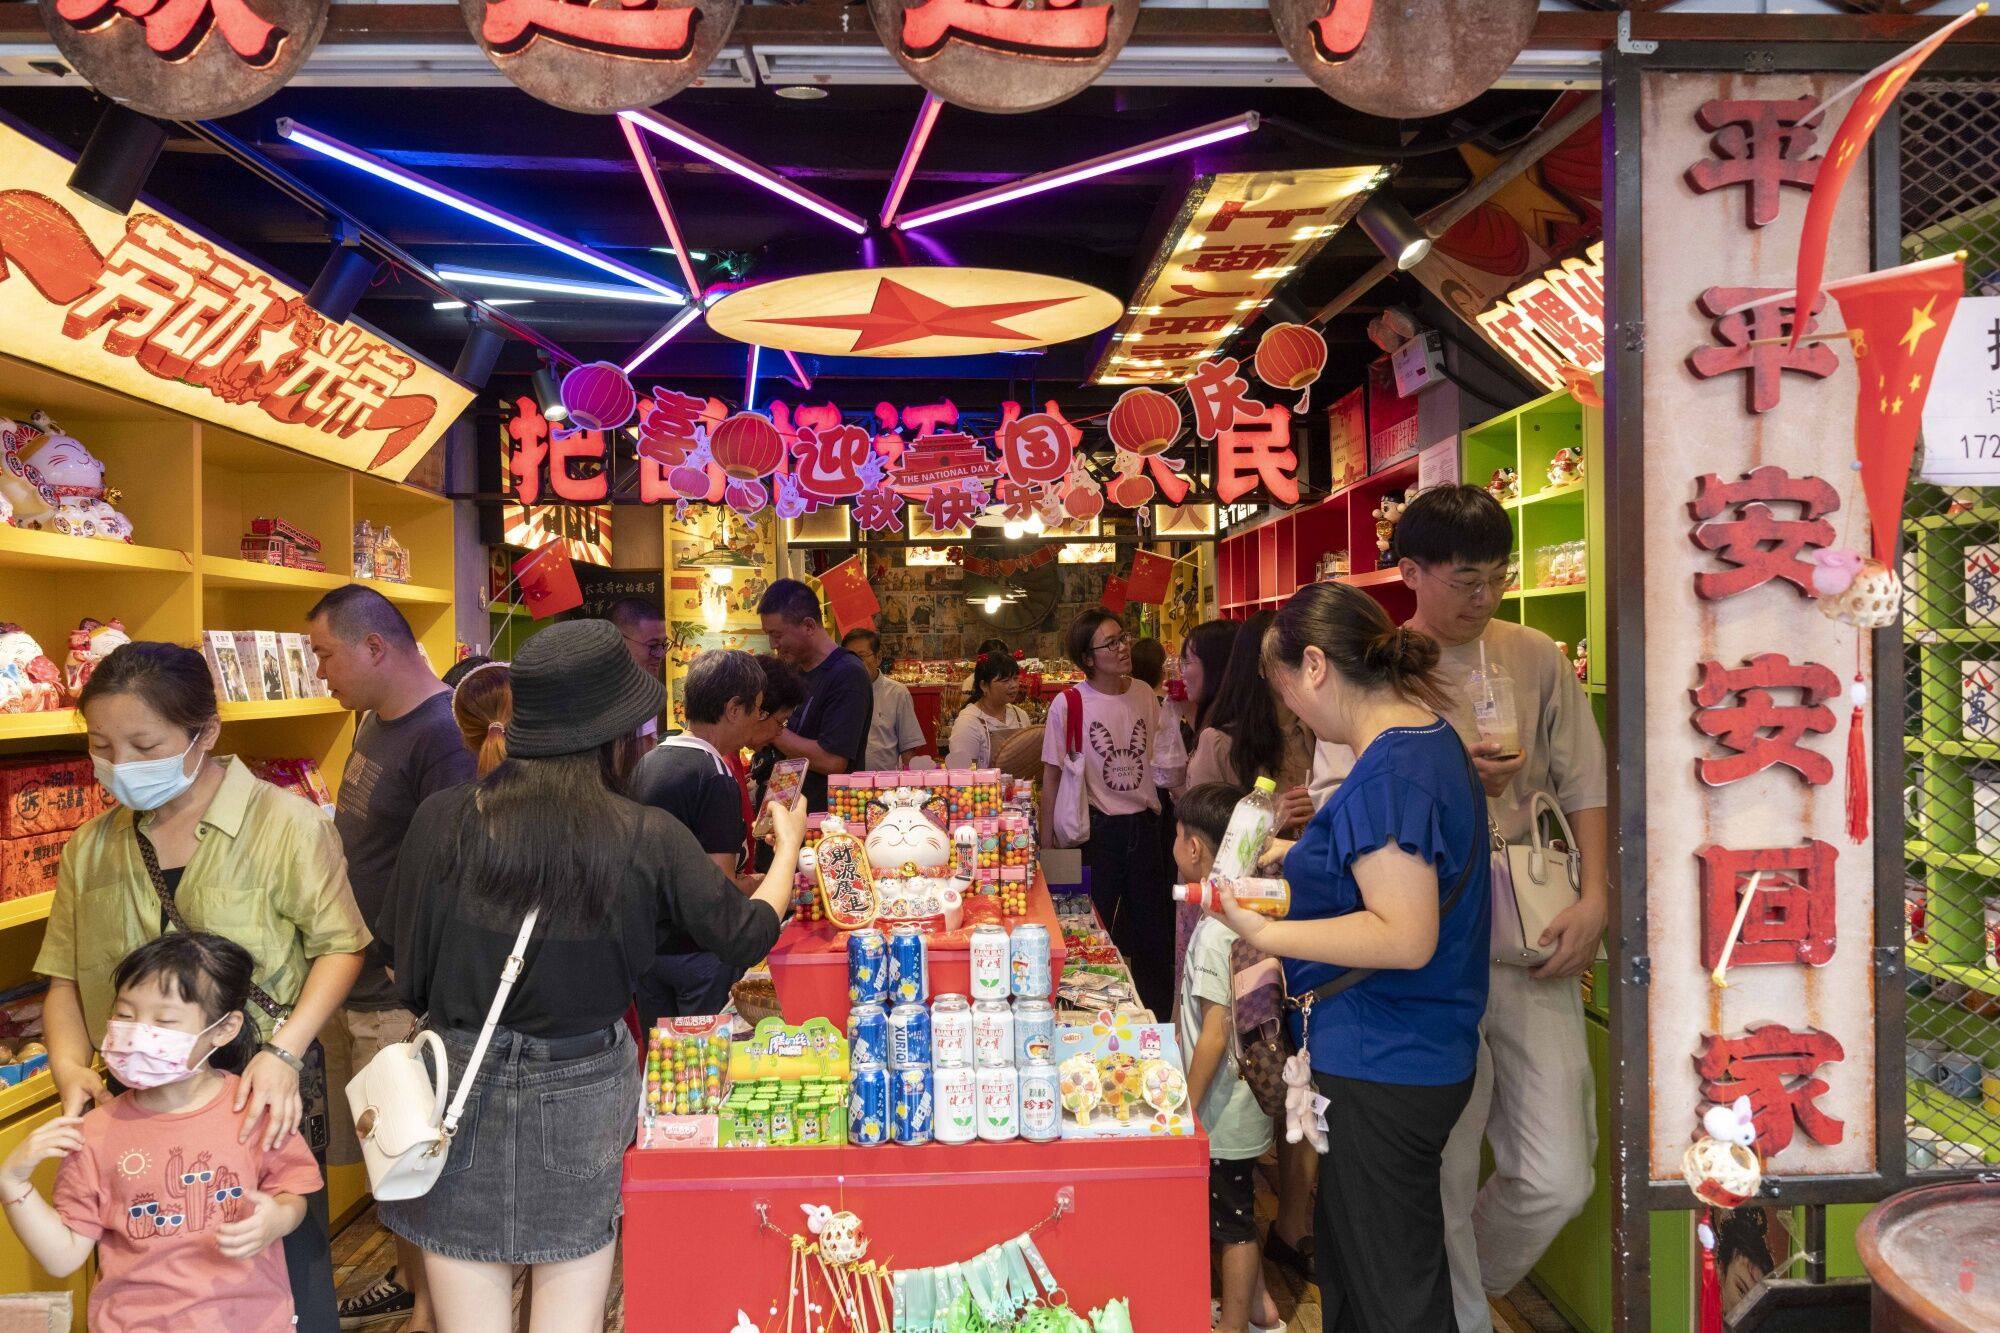 scmp.com - Alice Li - Retail sales sink in Shanghai as China works to cushion consumption